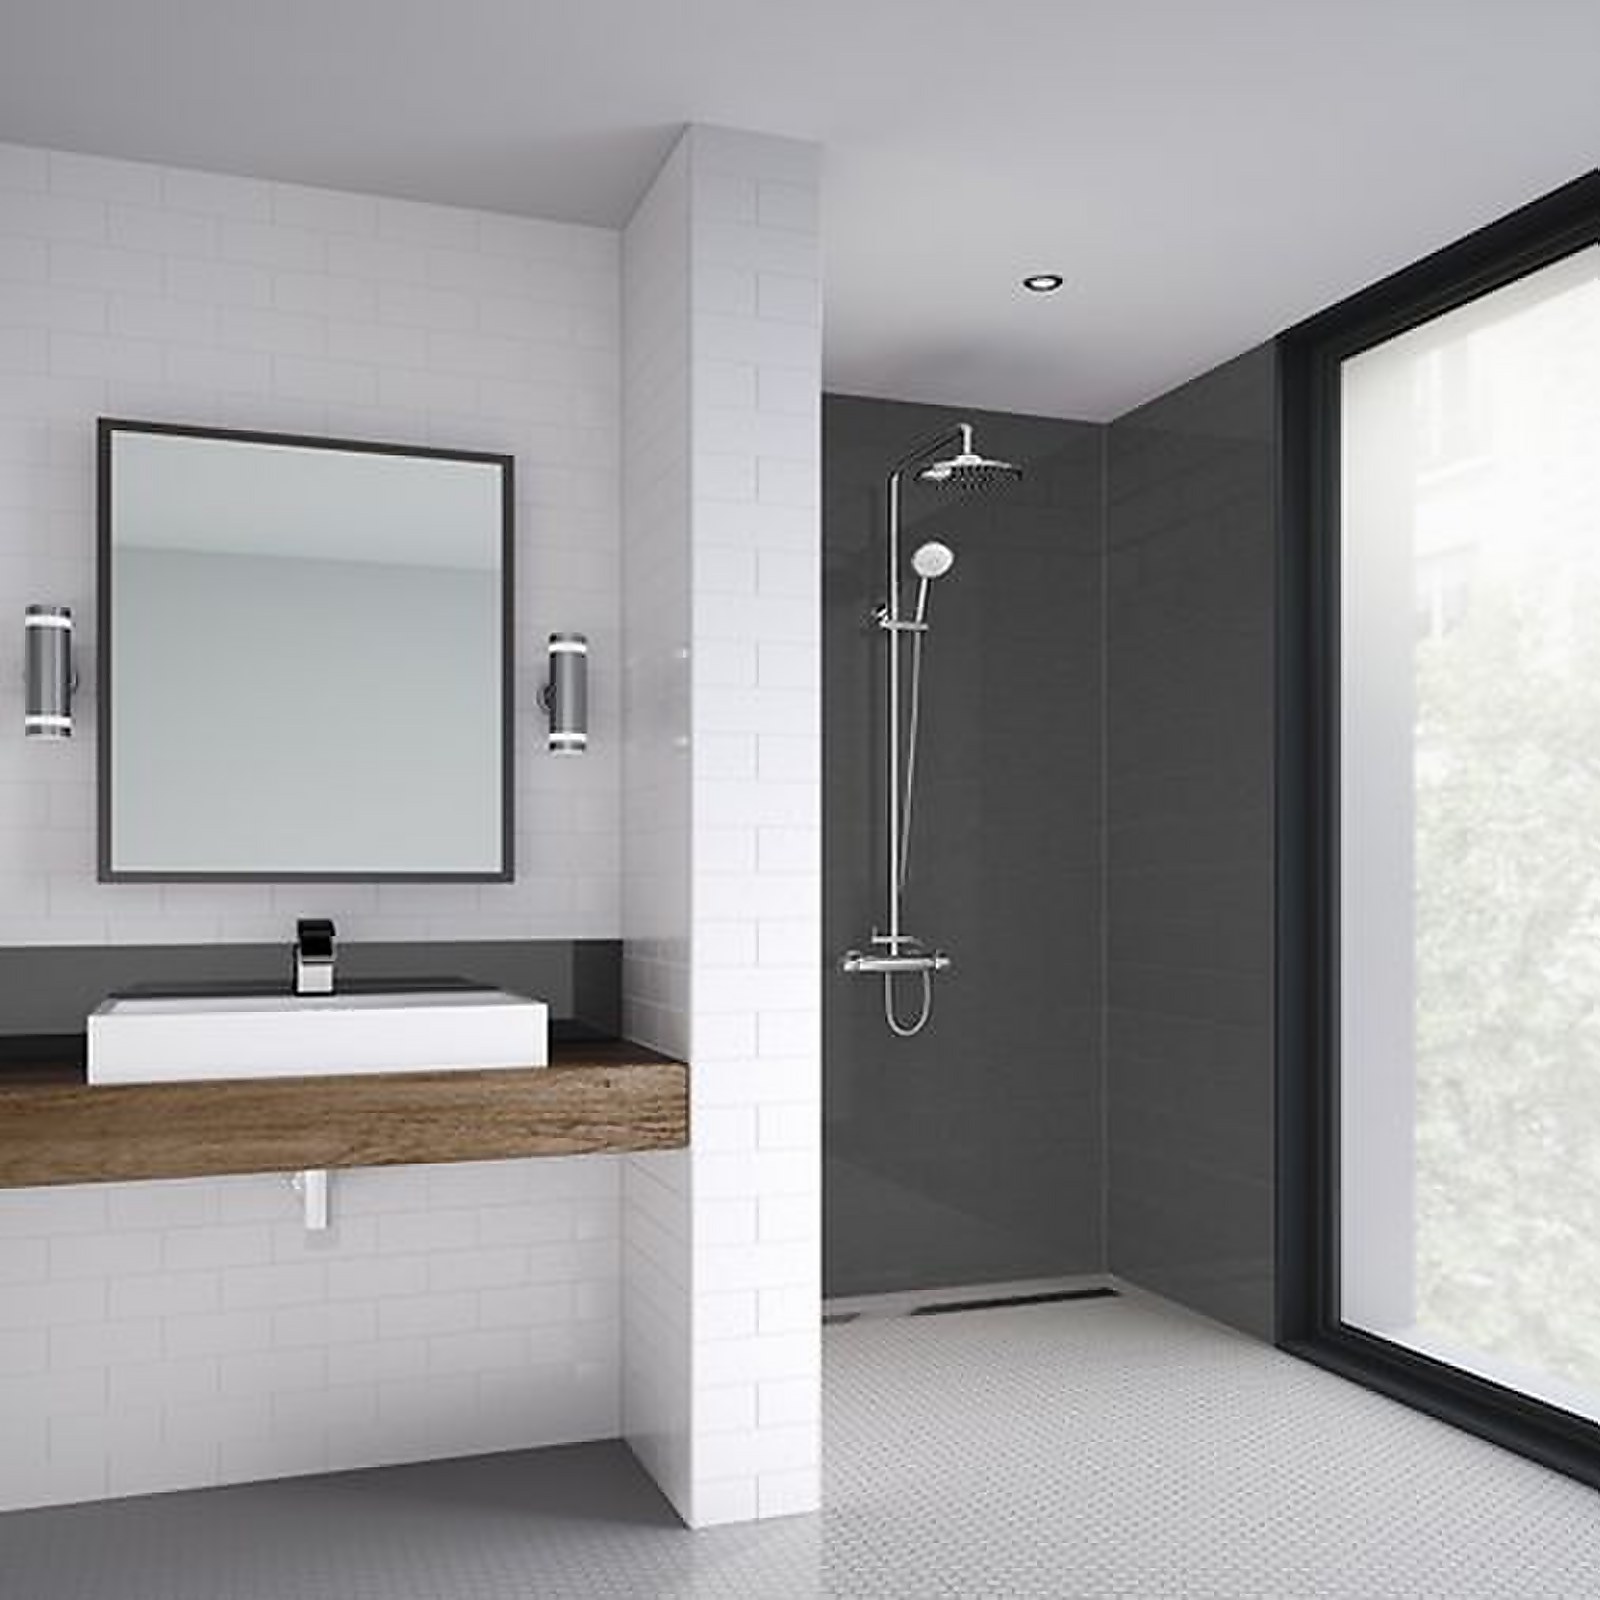 Photo of Wetwall Brushed Black - 1220mm - Shower Panel - Composite